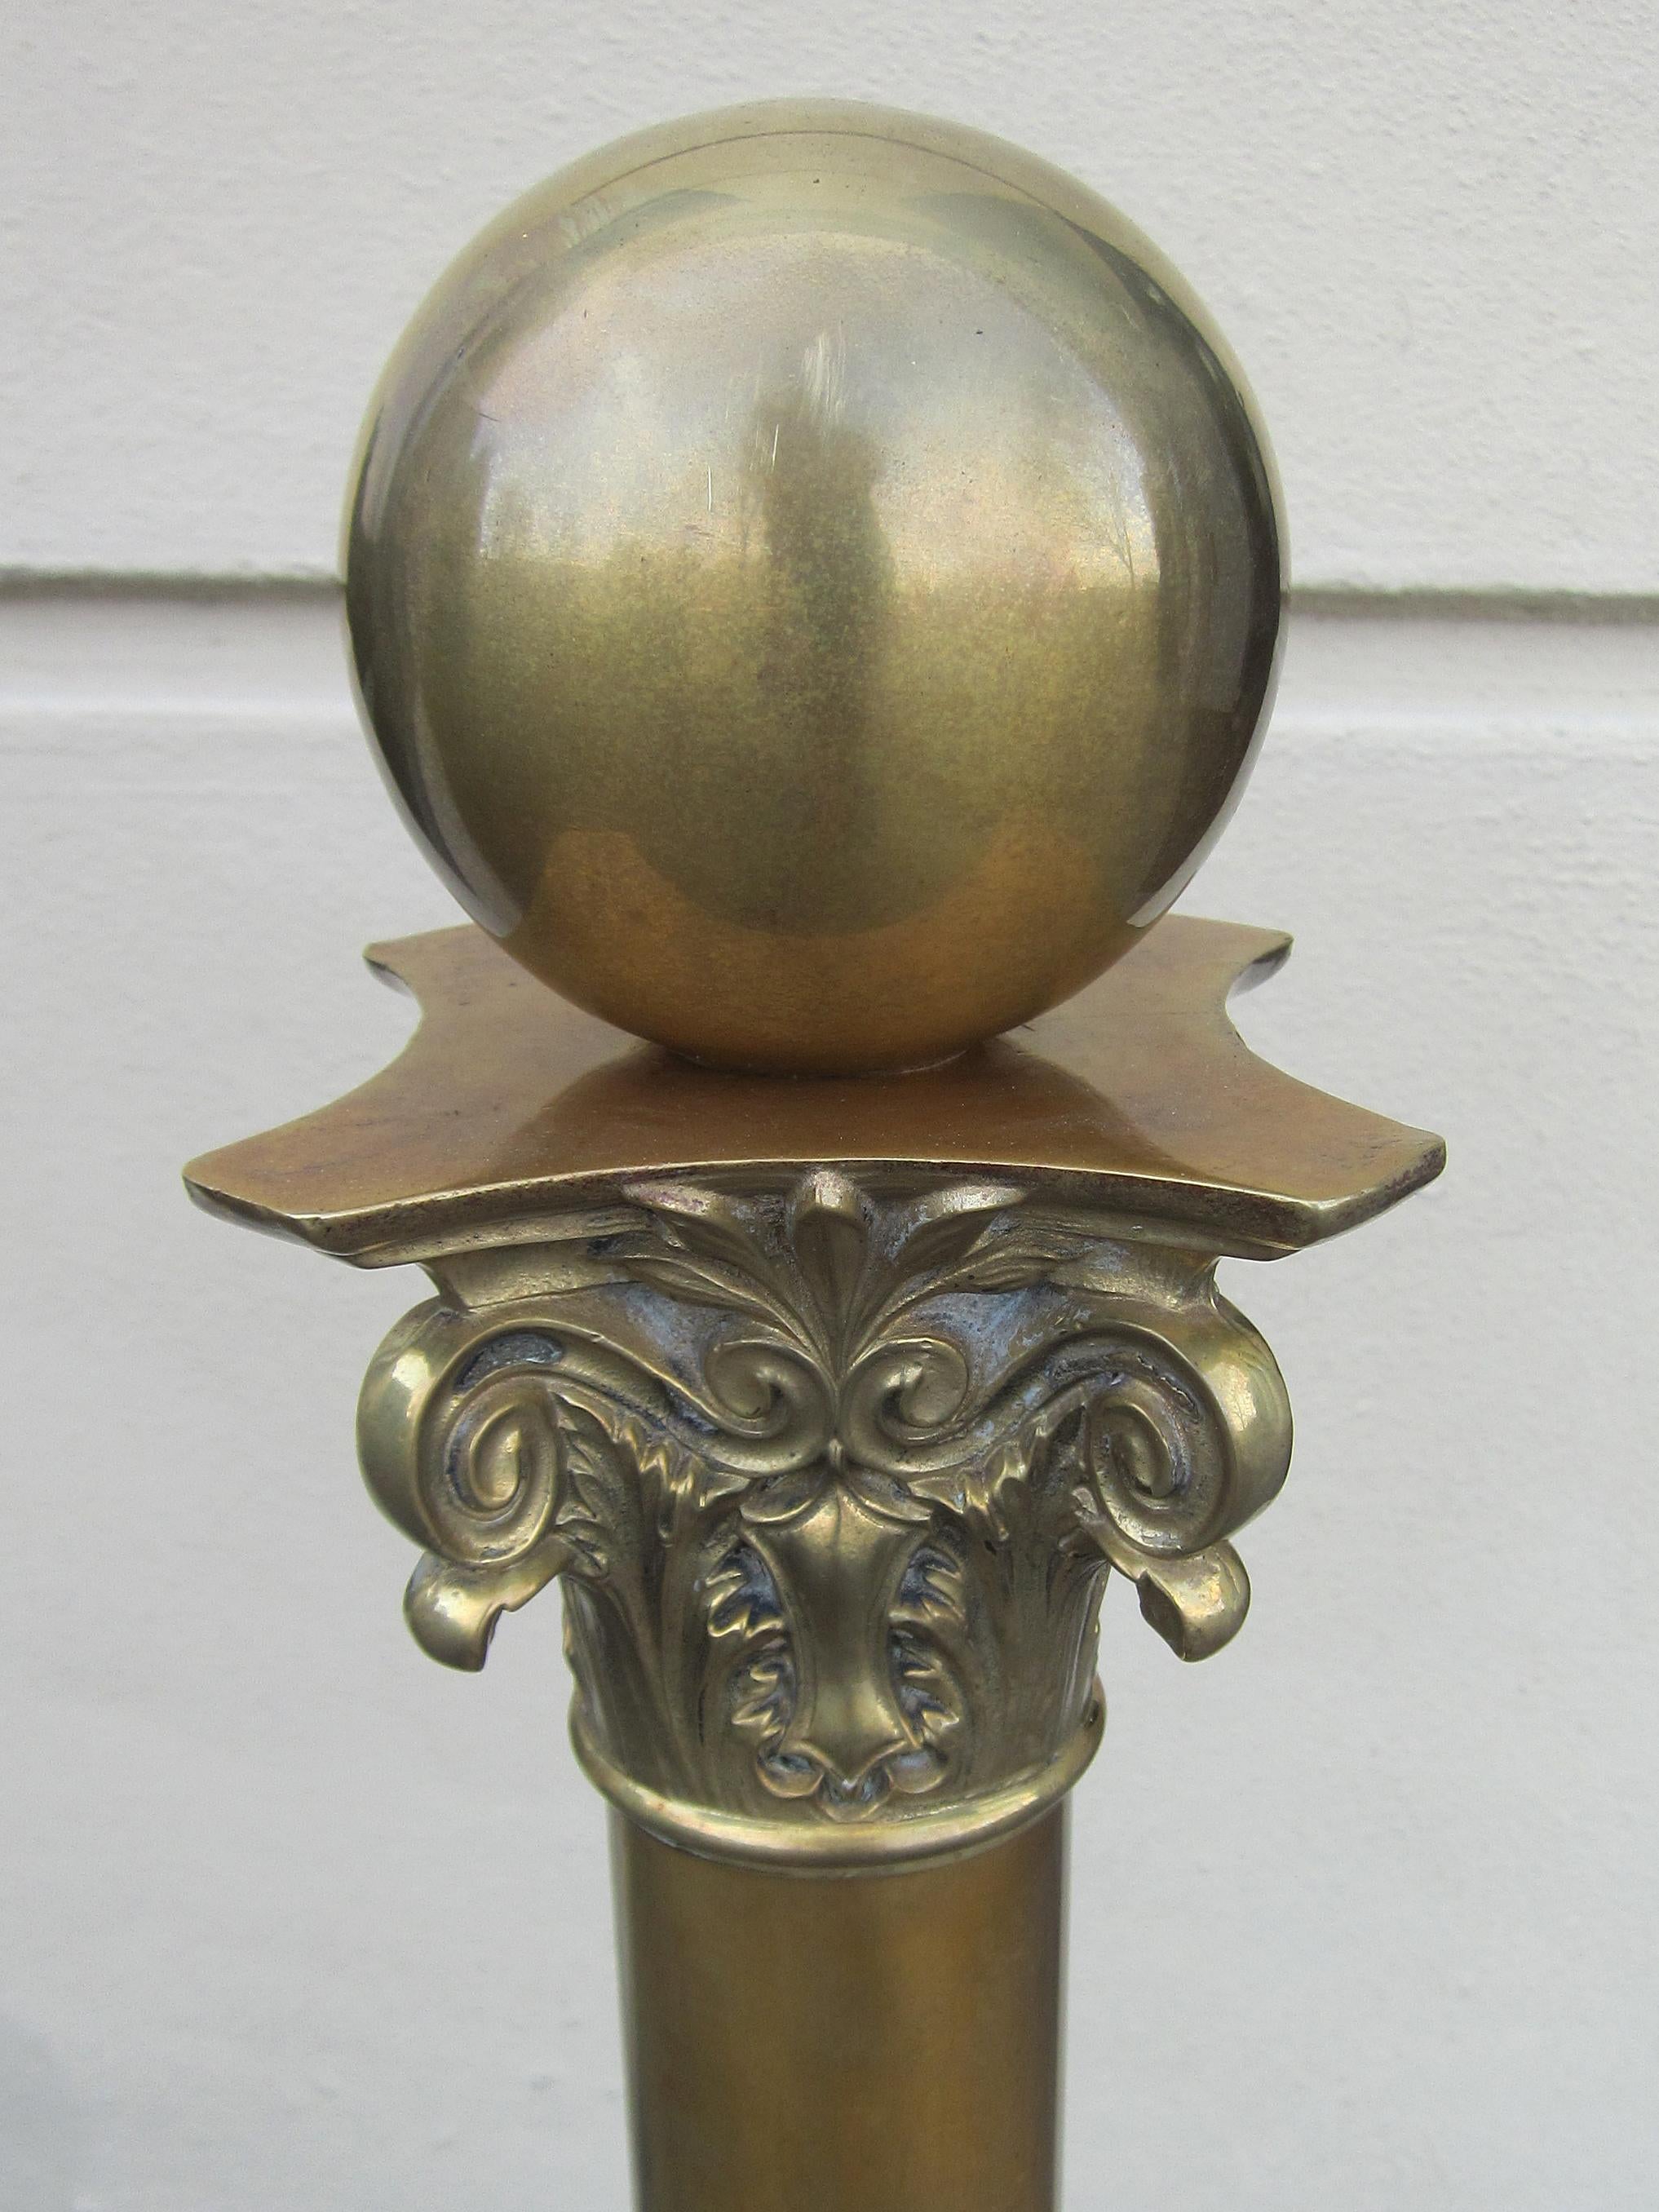 Early 20th century brass andirons with ball finials.